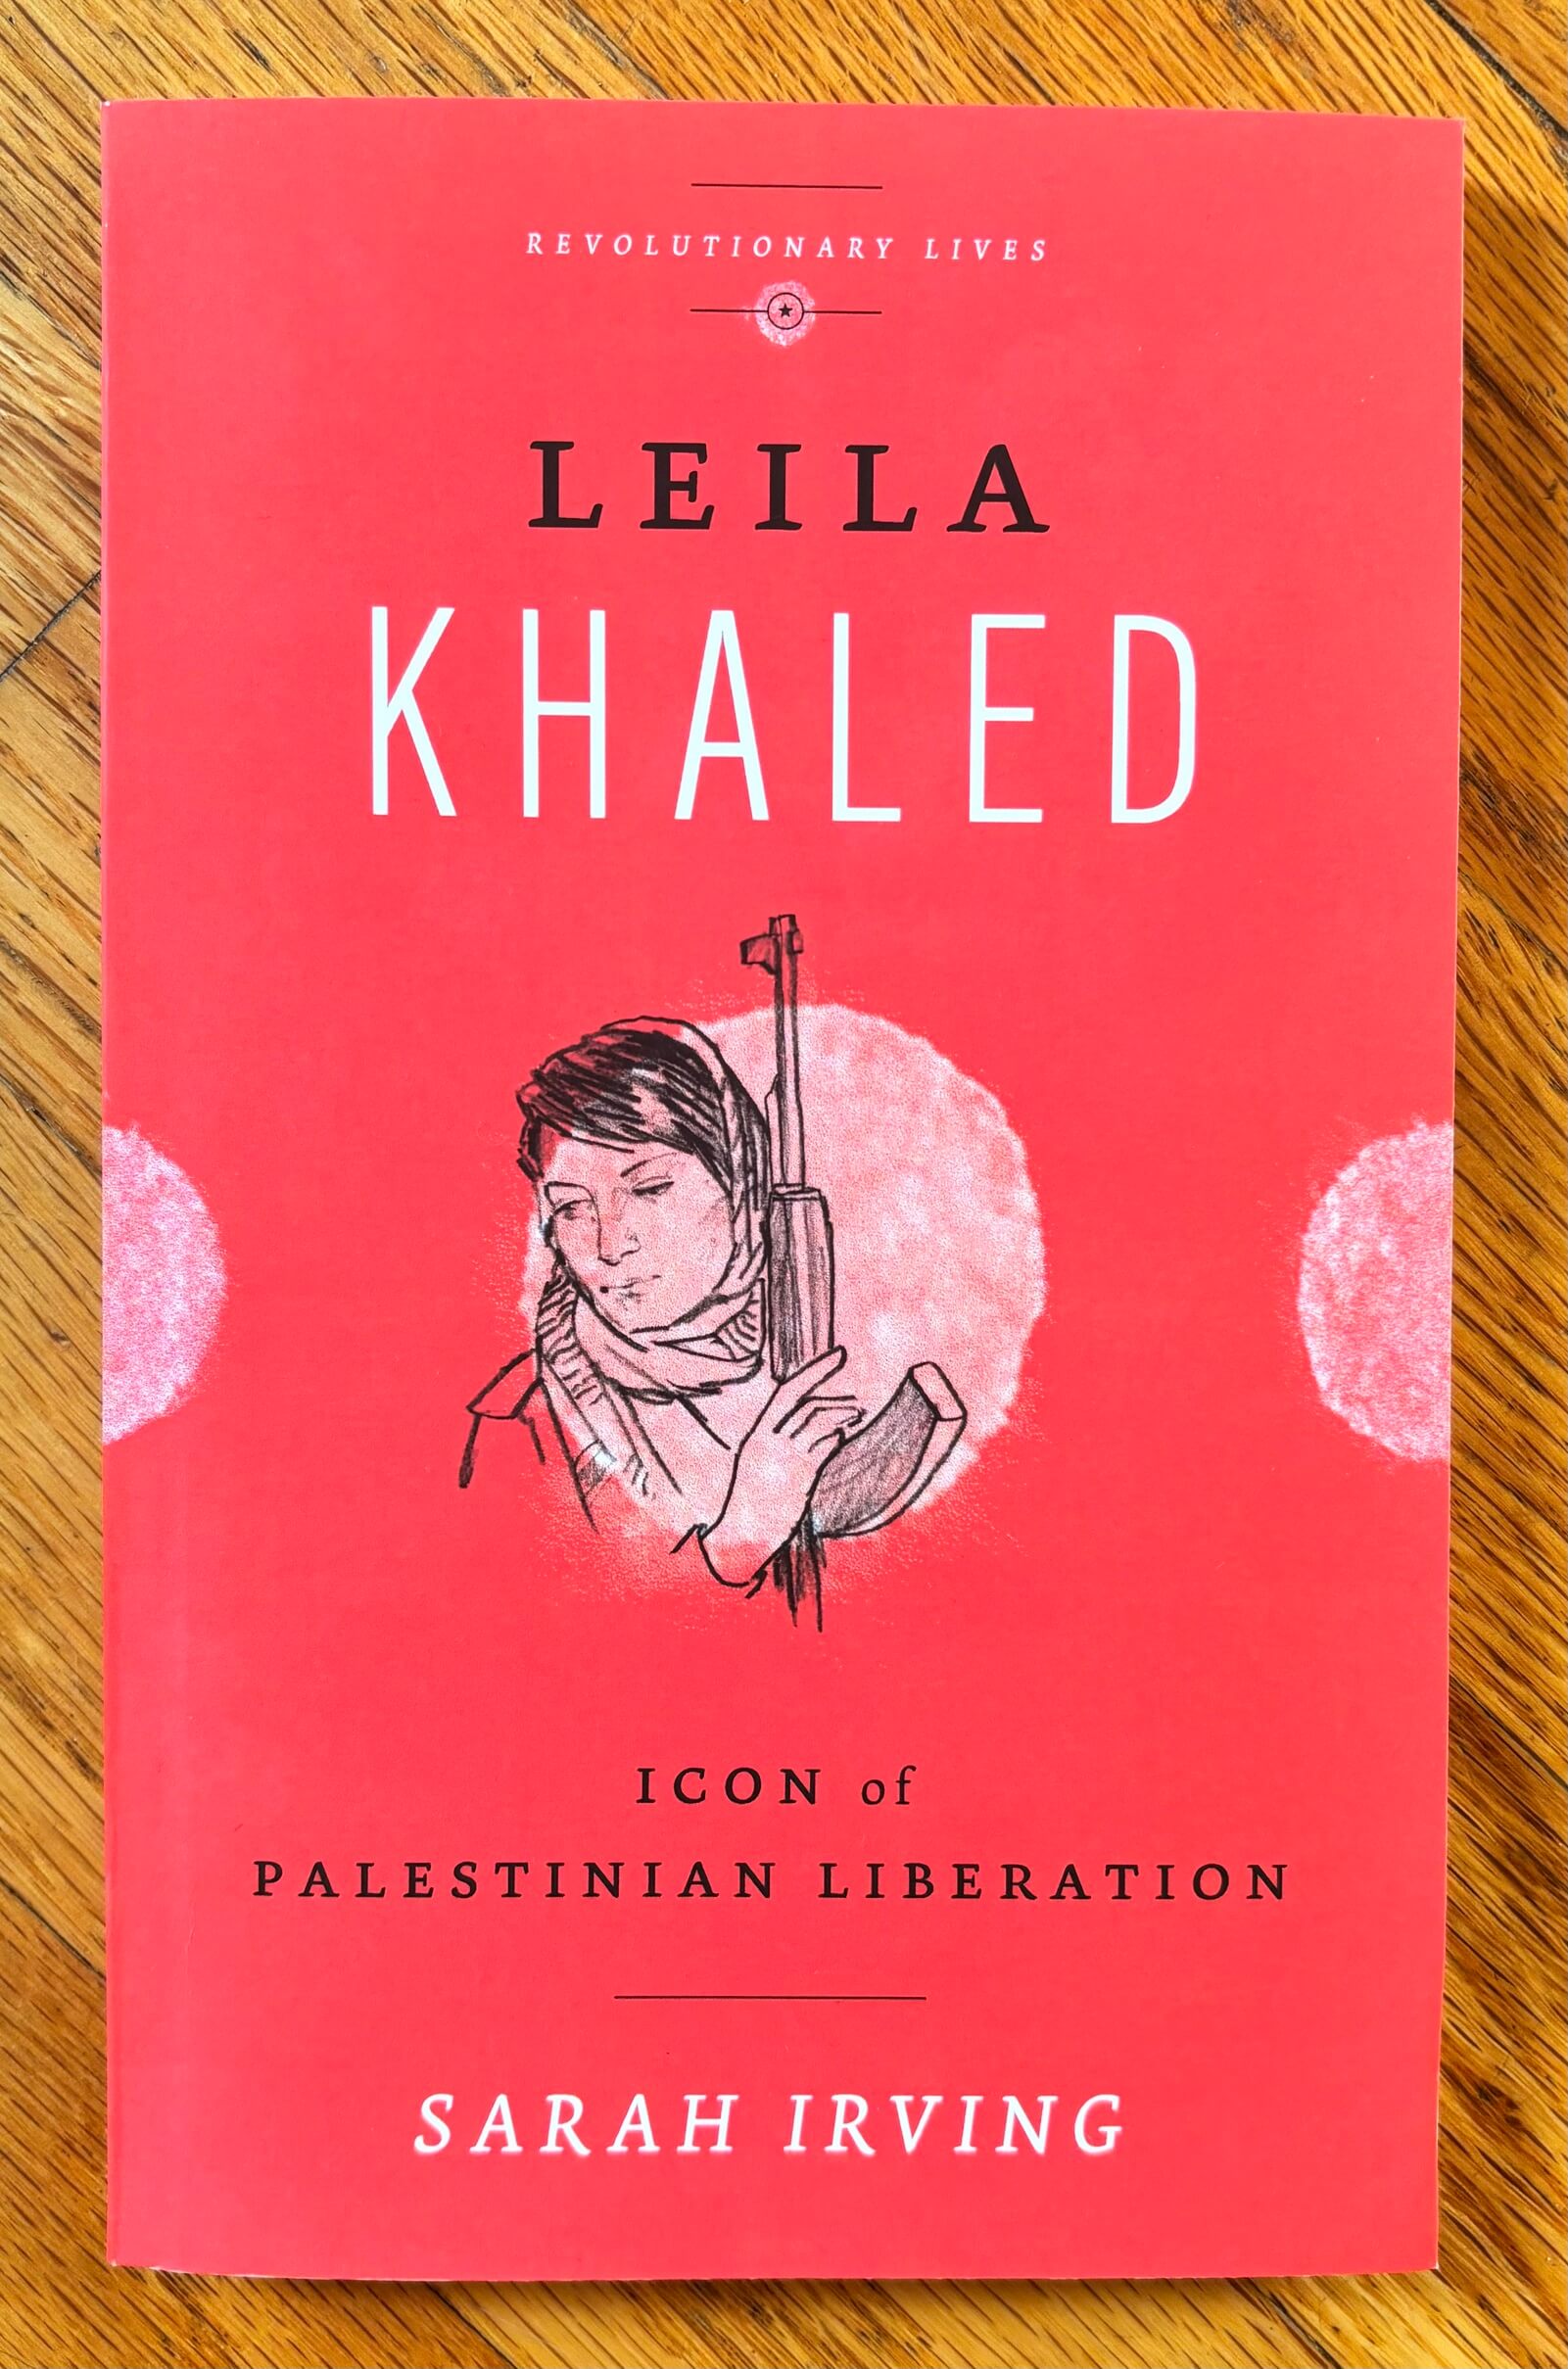 “Leila Khaled: Icon of Palestinian Liberation” by Sarah Irving